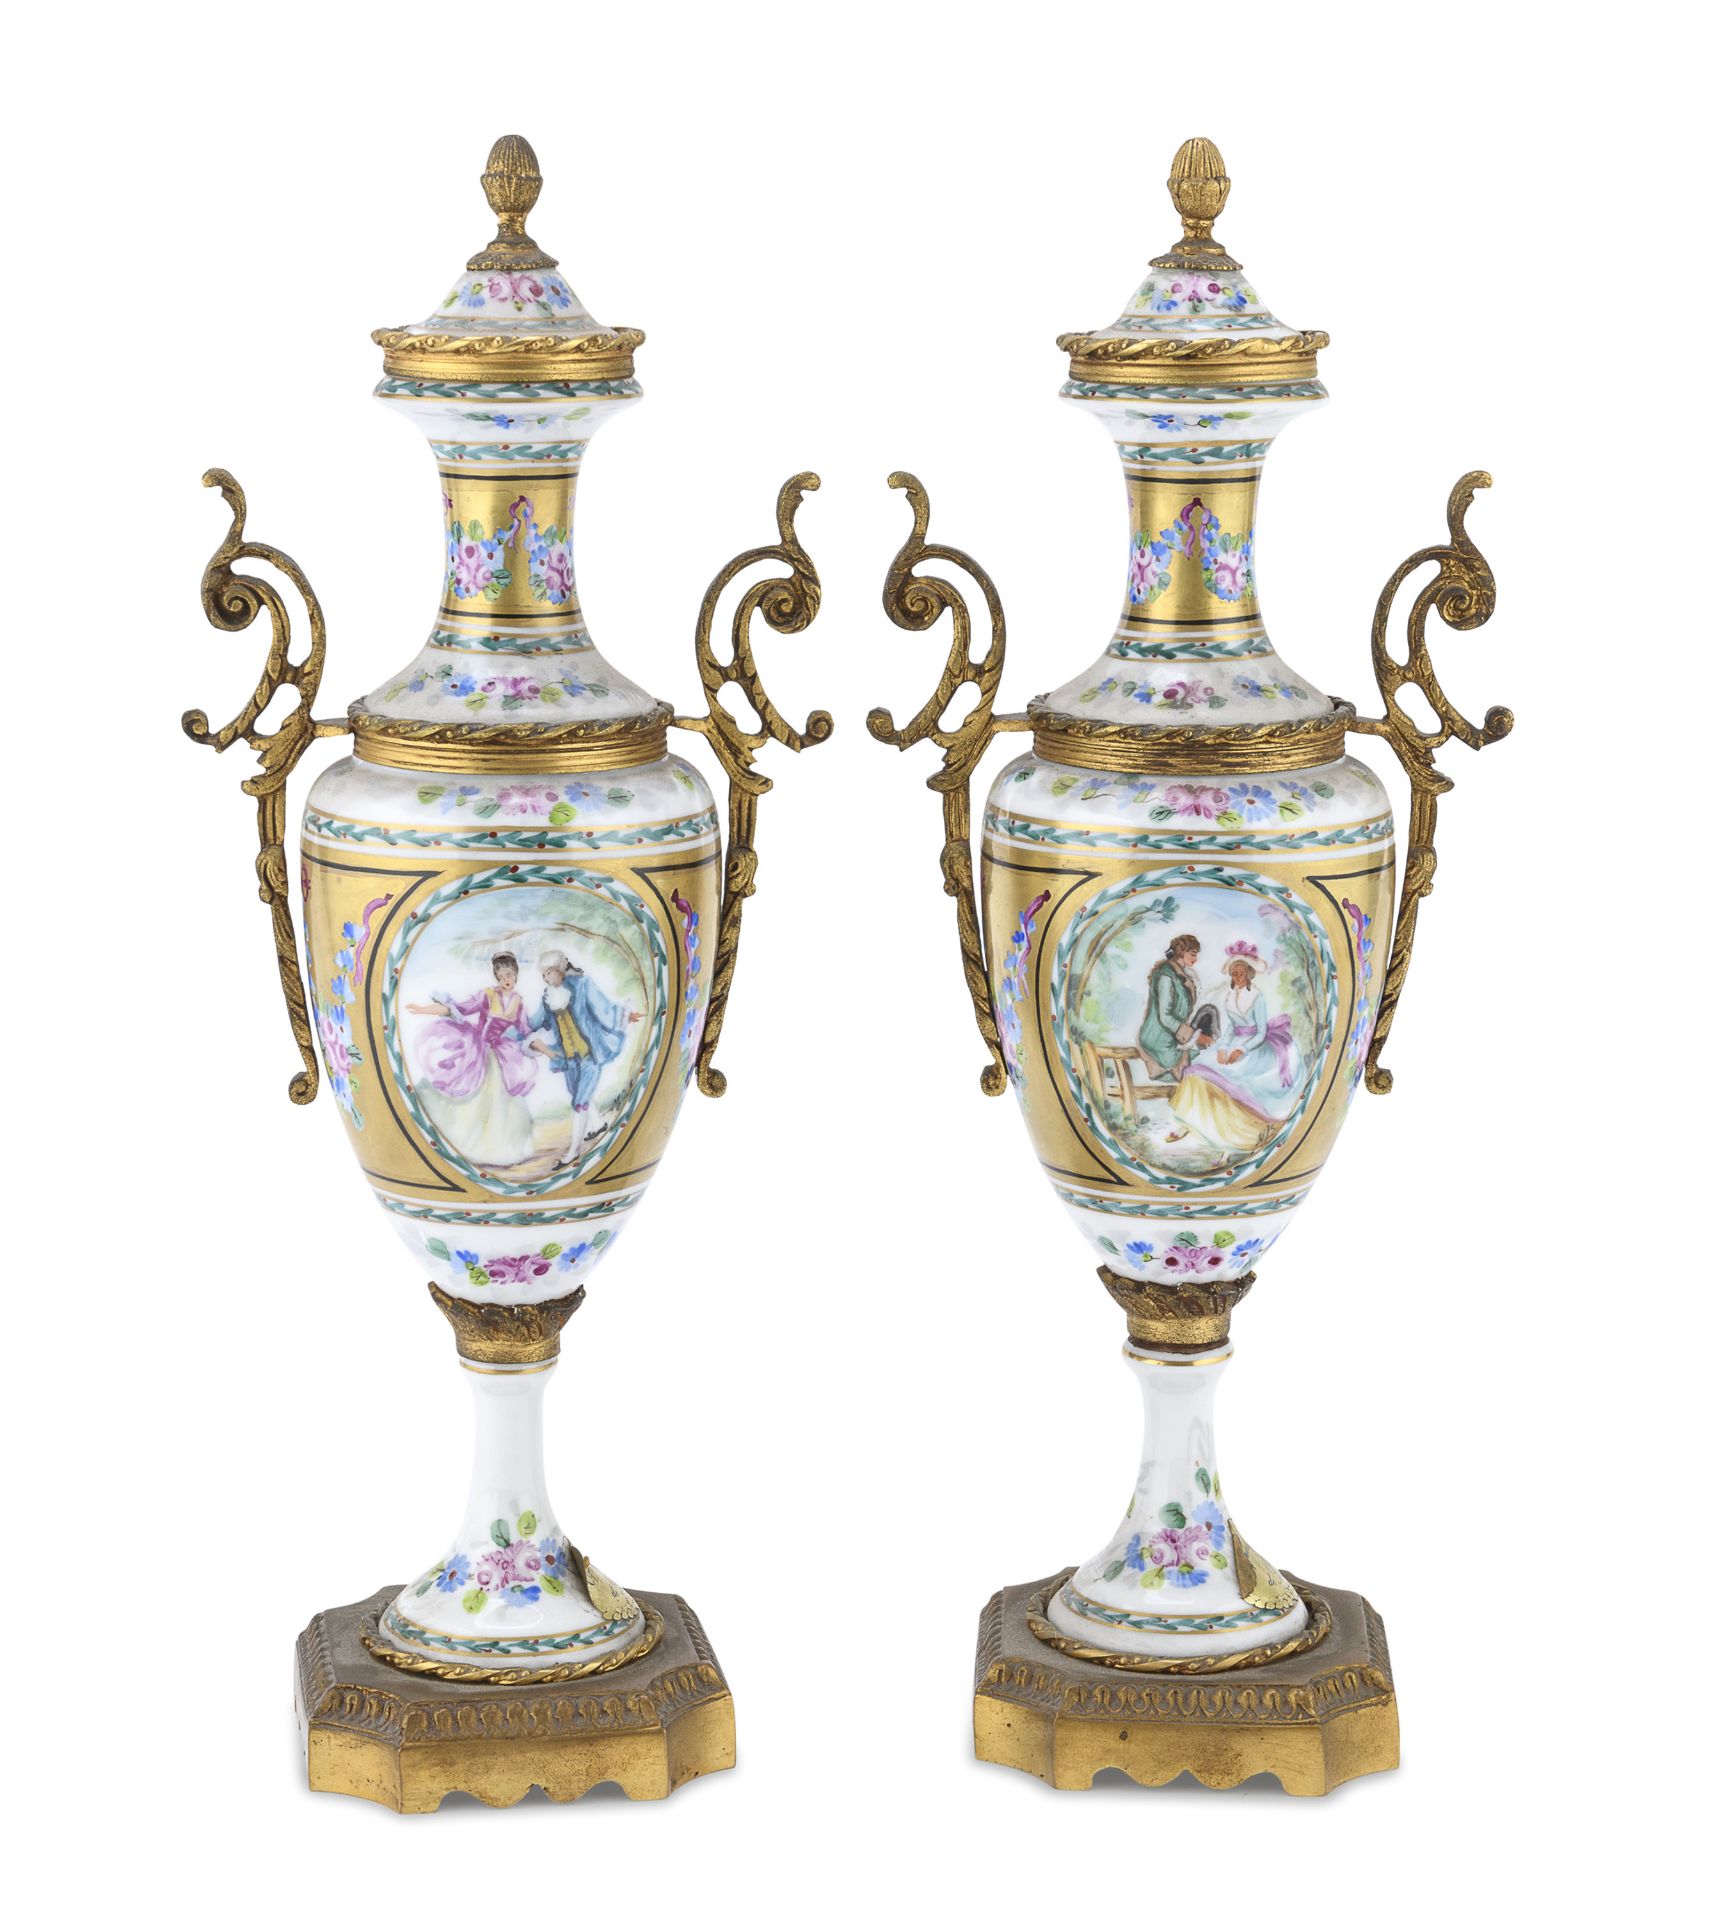 PAIR OF PORCELAIN VASES FRANCE EARLY 20TH CENTURY